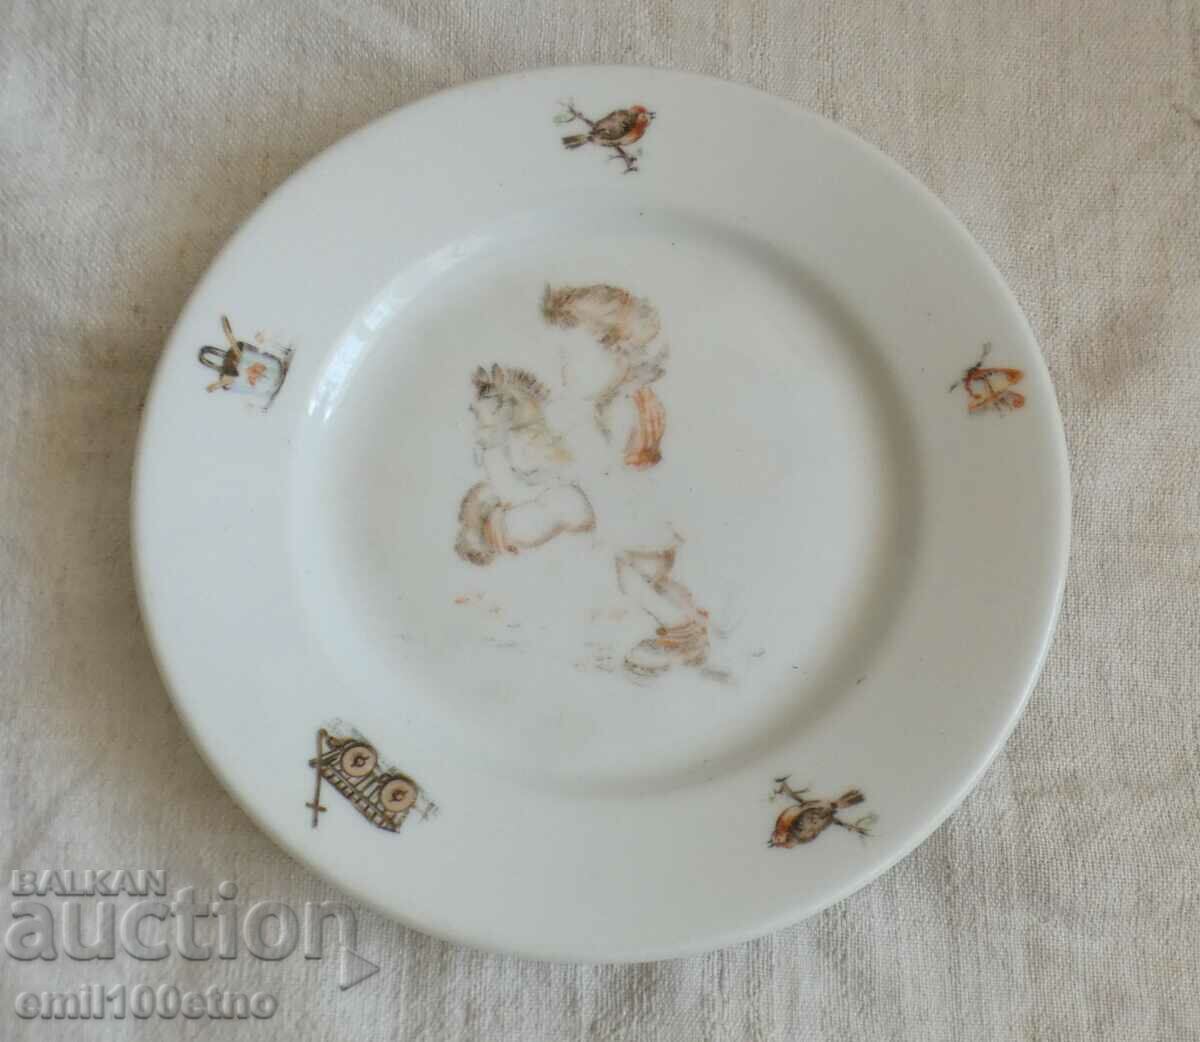 Very old Hutschenreuther Hohenberg porcelain children's plate